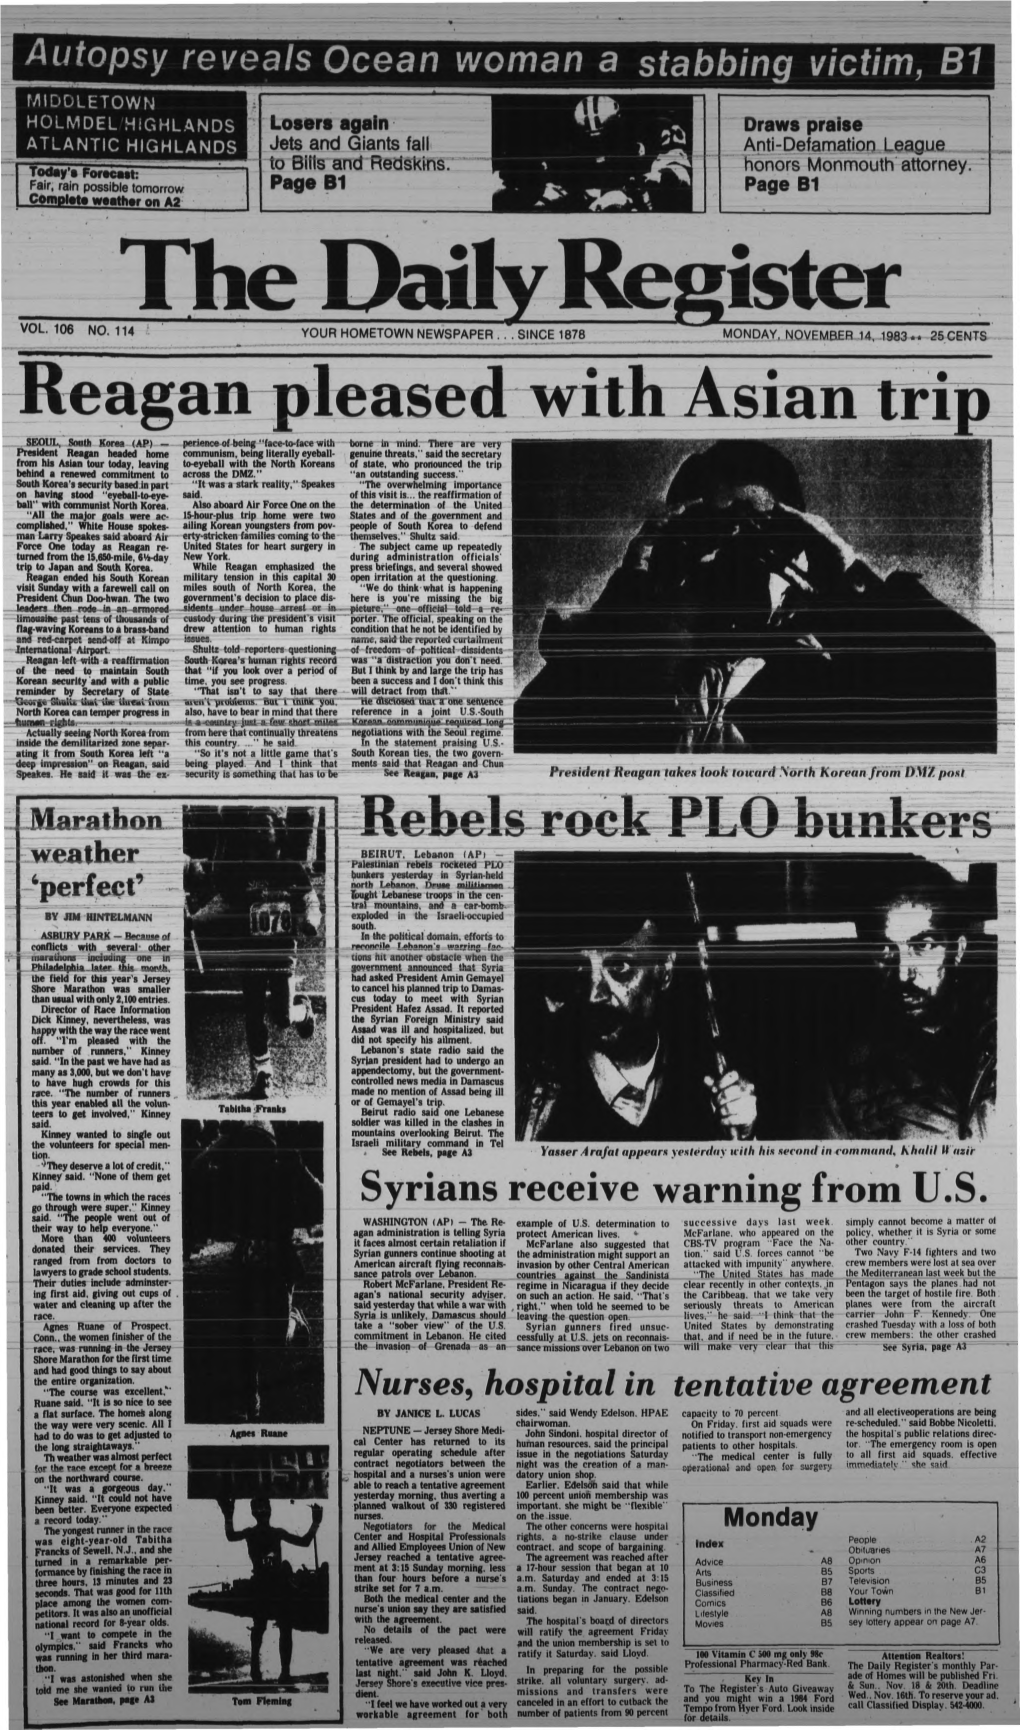 Reagan Pleased with Asian Trip SEOUL, South Korea (AP) - Perience of Being "Face-To-Face with Borne in Mind